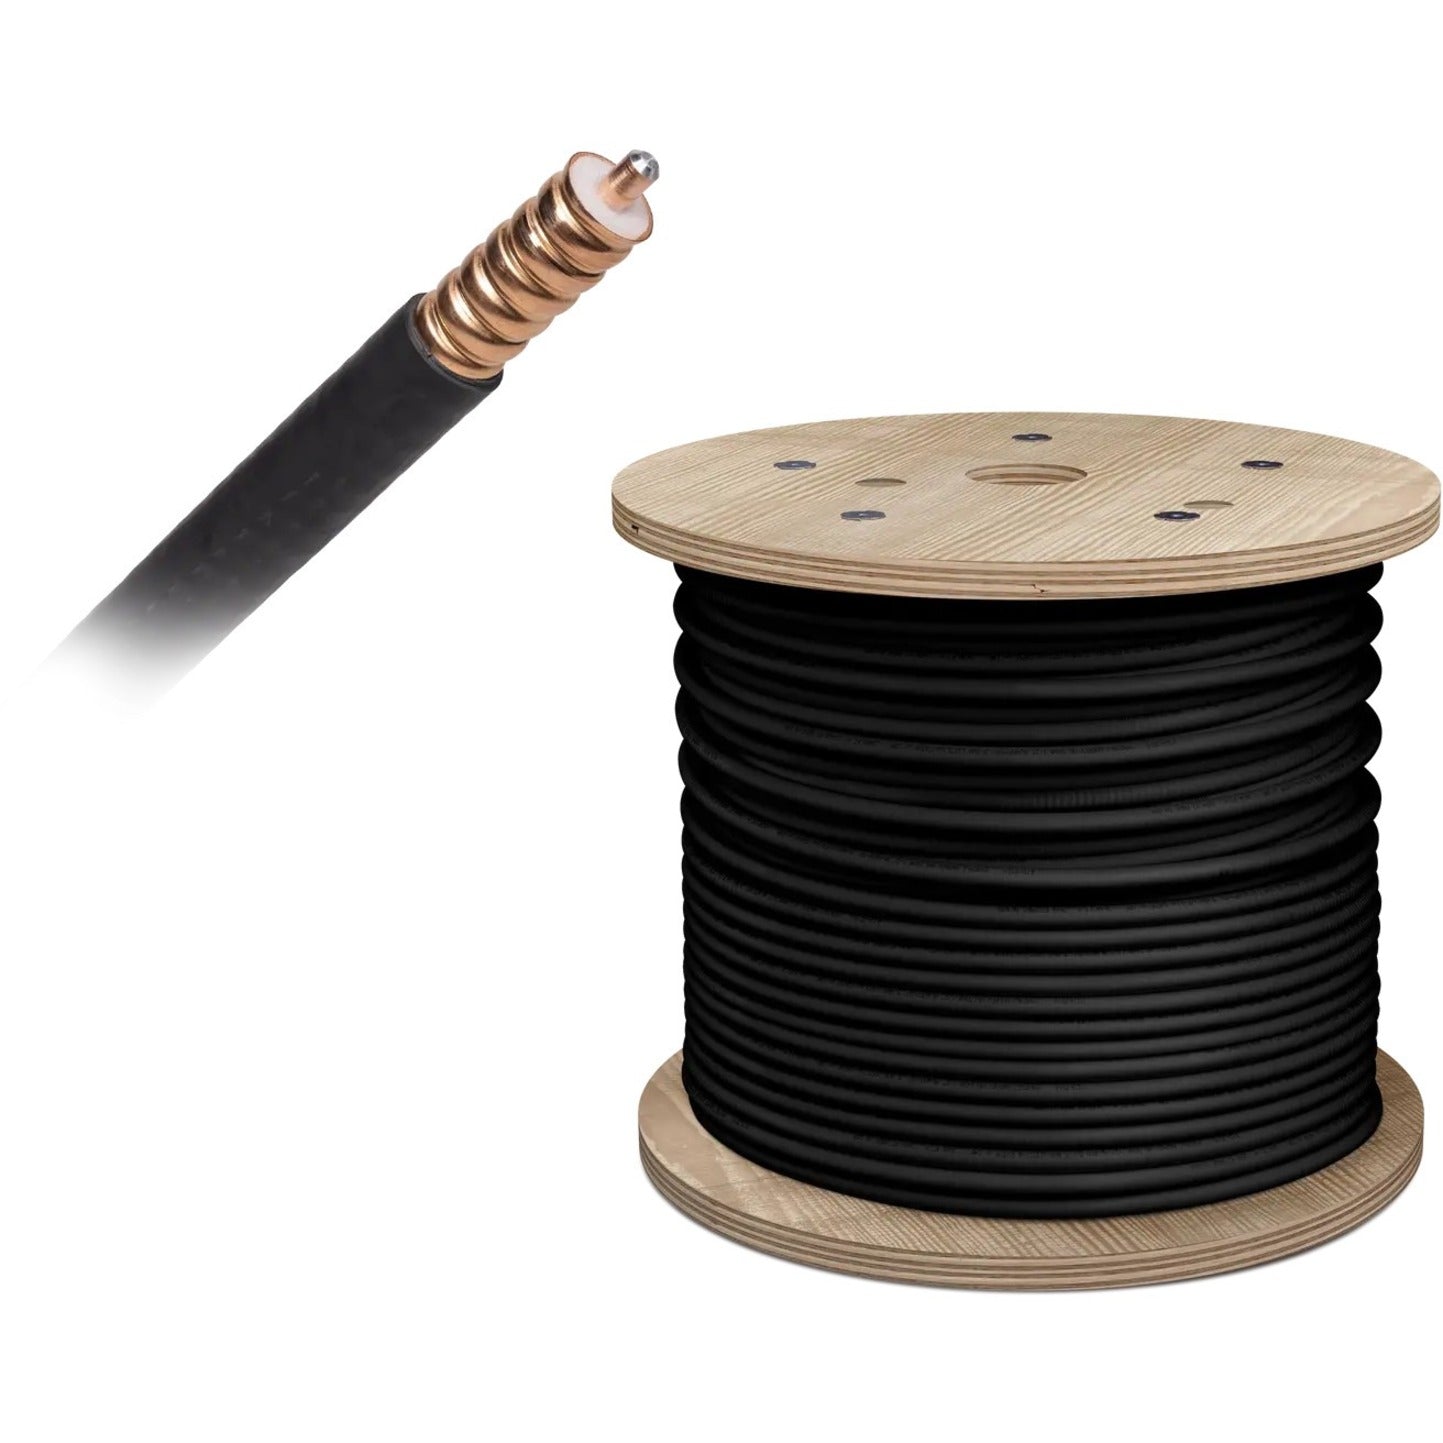 WilsonPro 952006 ½ in. Coaxial Cable, Kink Resistant, 498.69 ft